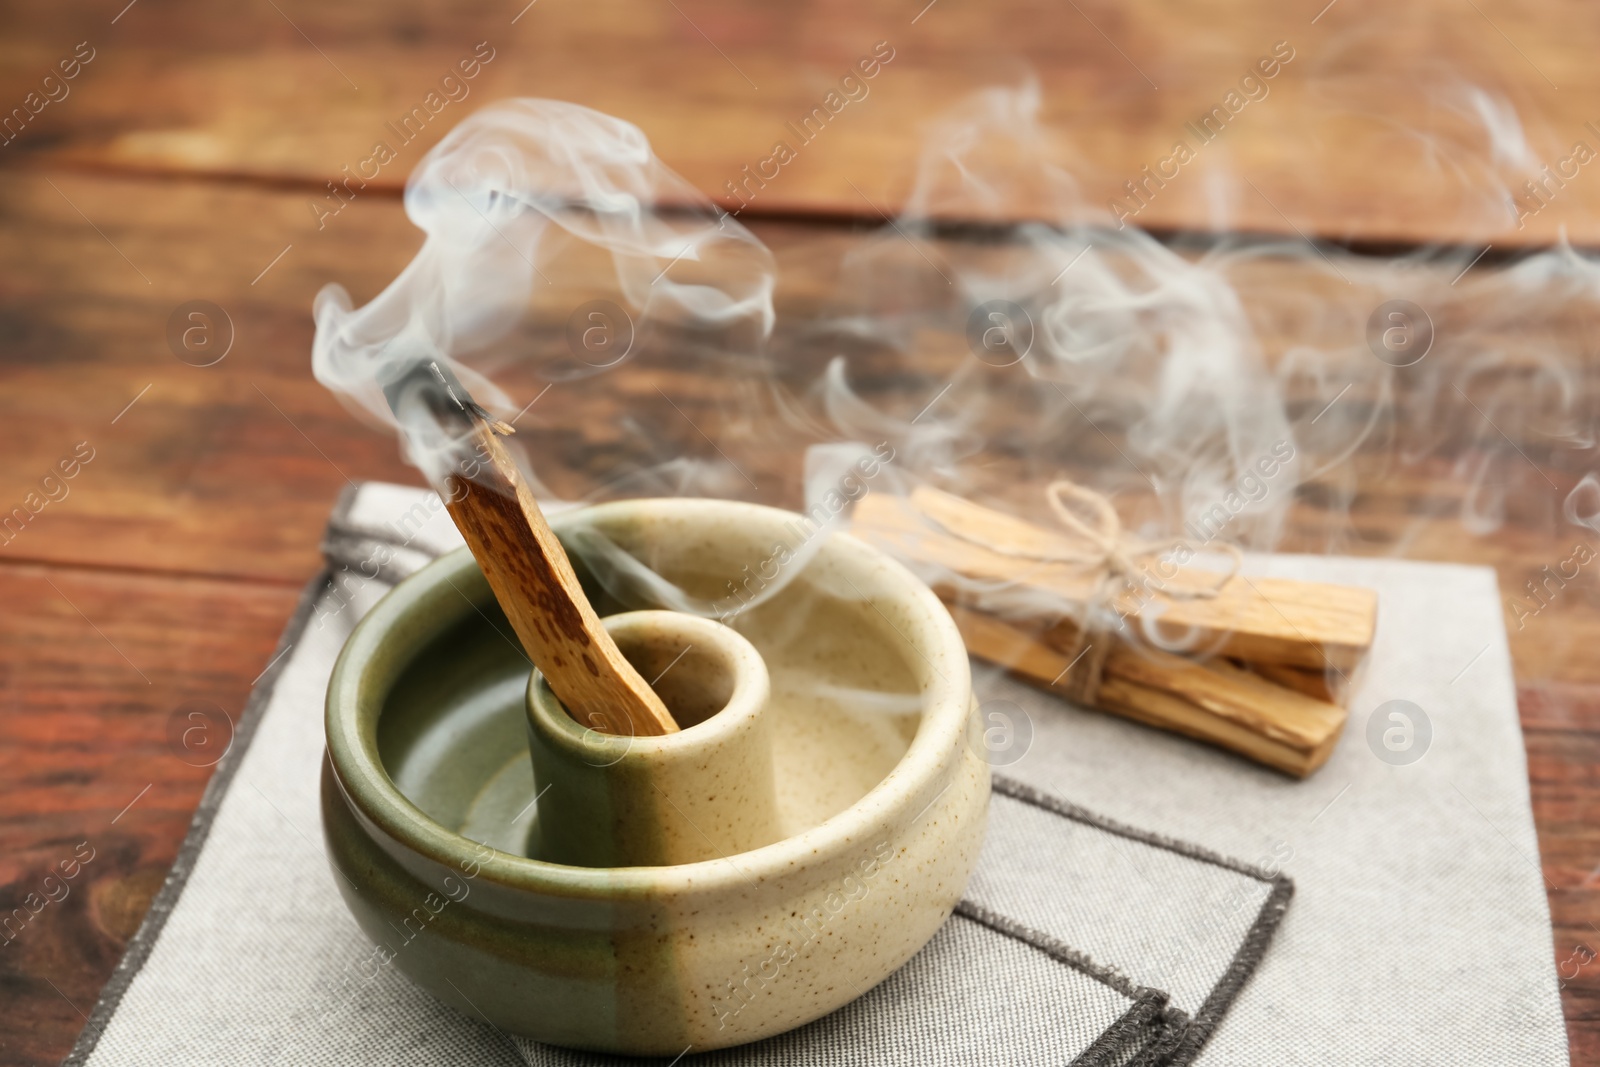 Photo of Palo Santo stick smoldering in holder on wooden table